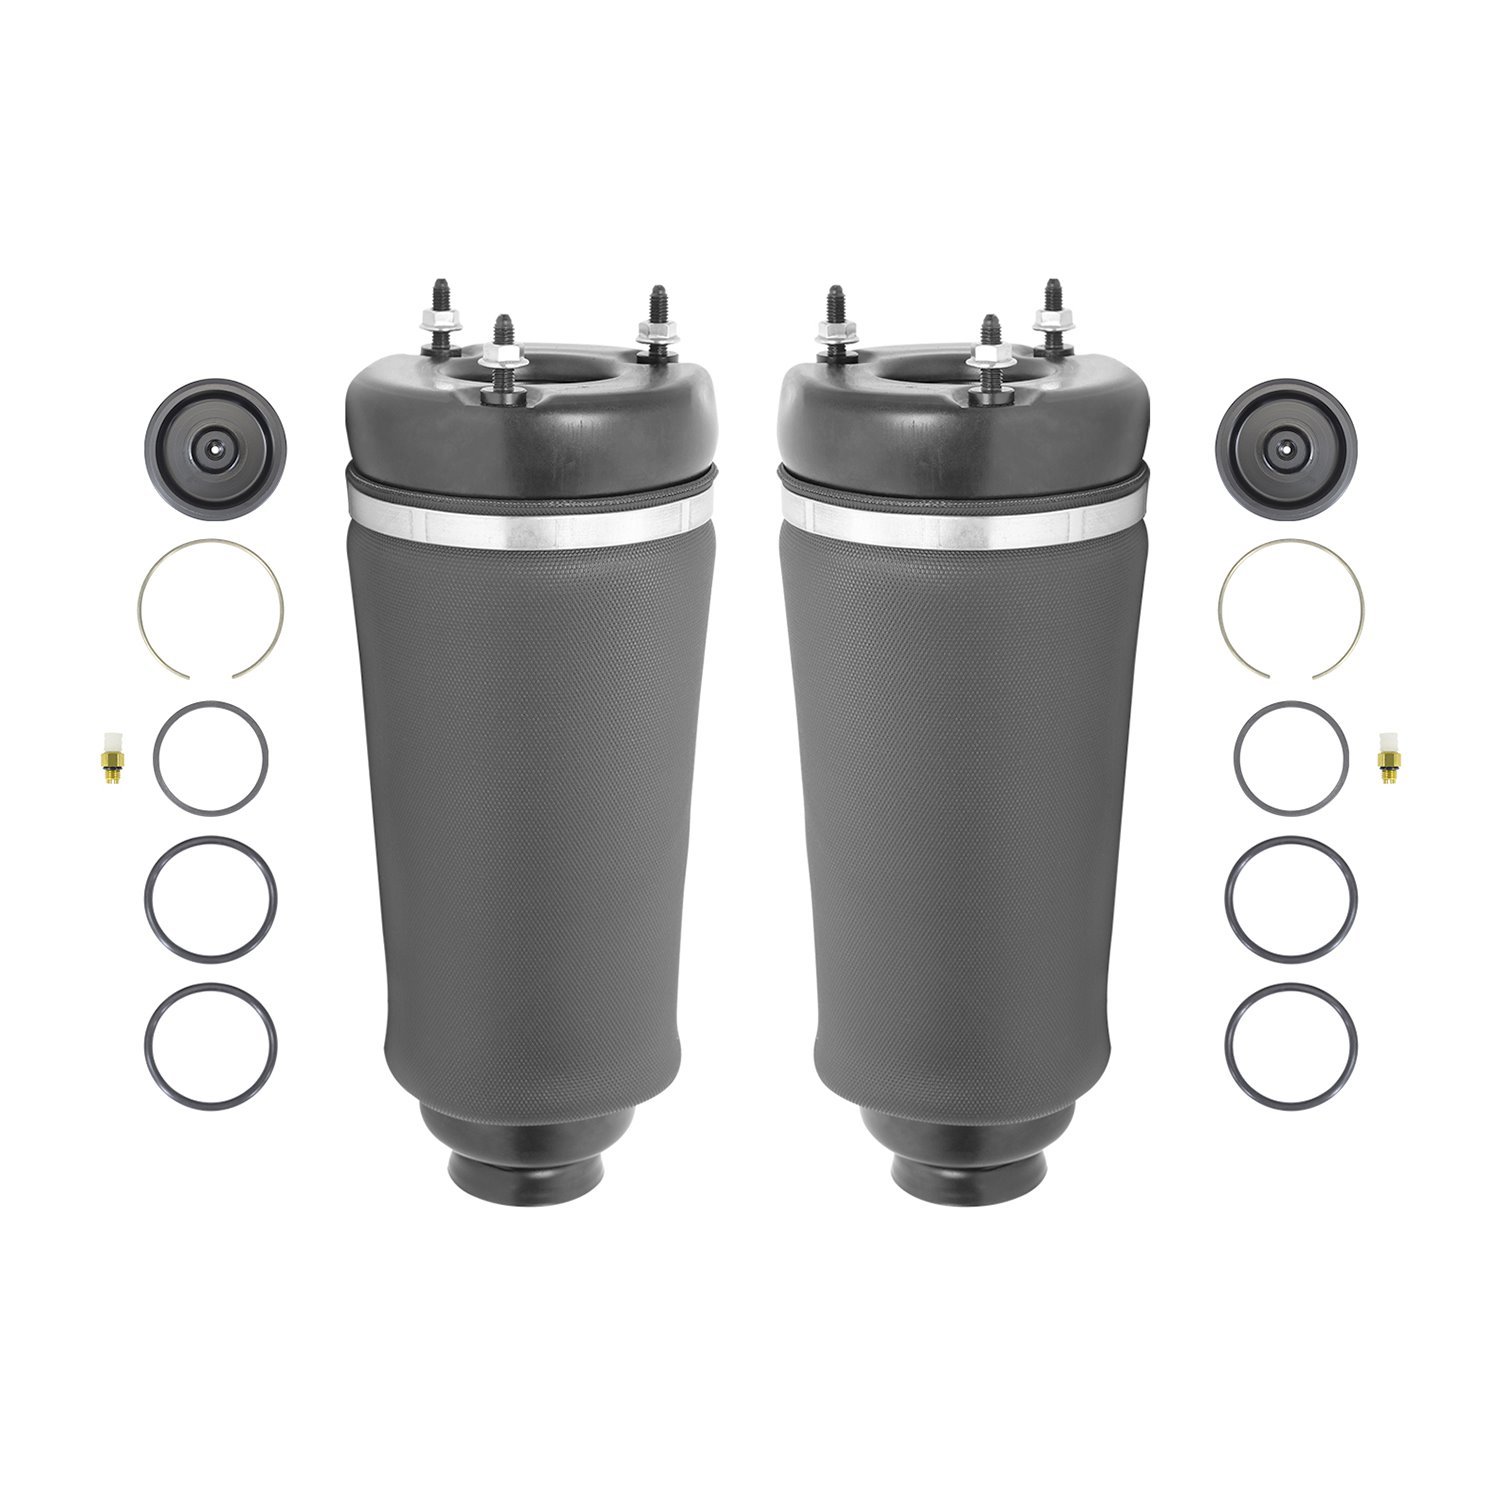 2-15-112800 Front Suspension Air Spring Set, W251 Chassis, w/4 Corner Air Ride Fits Select Mercedes-Benz